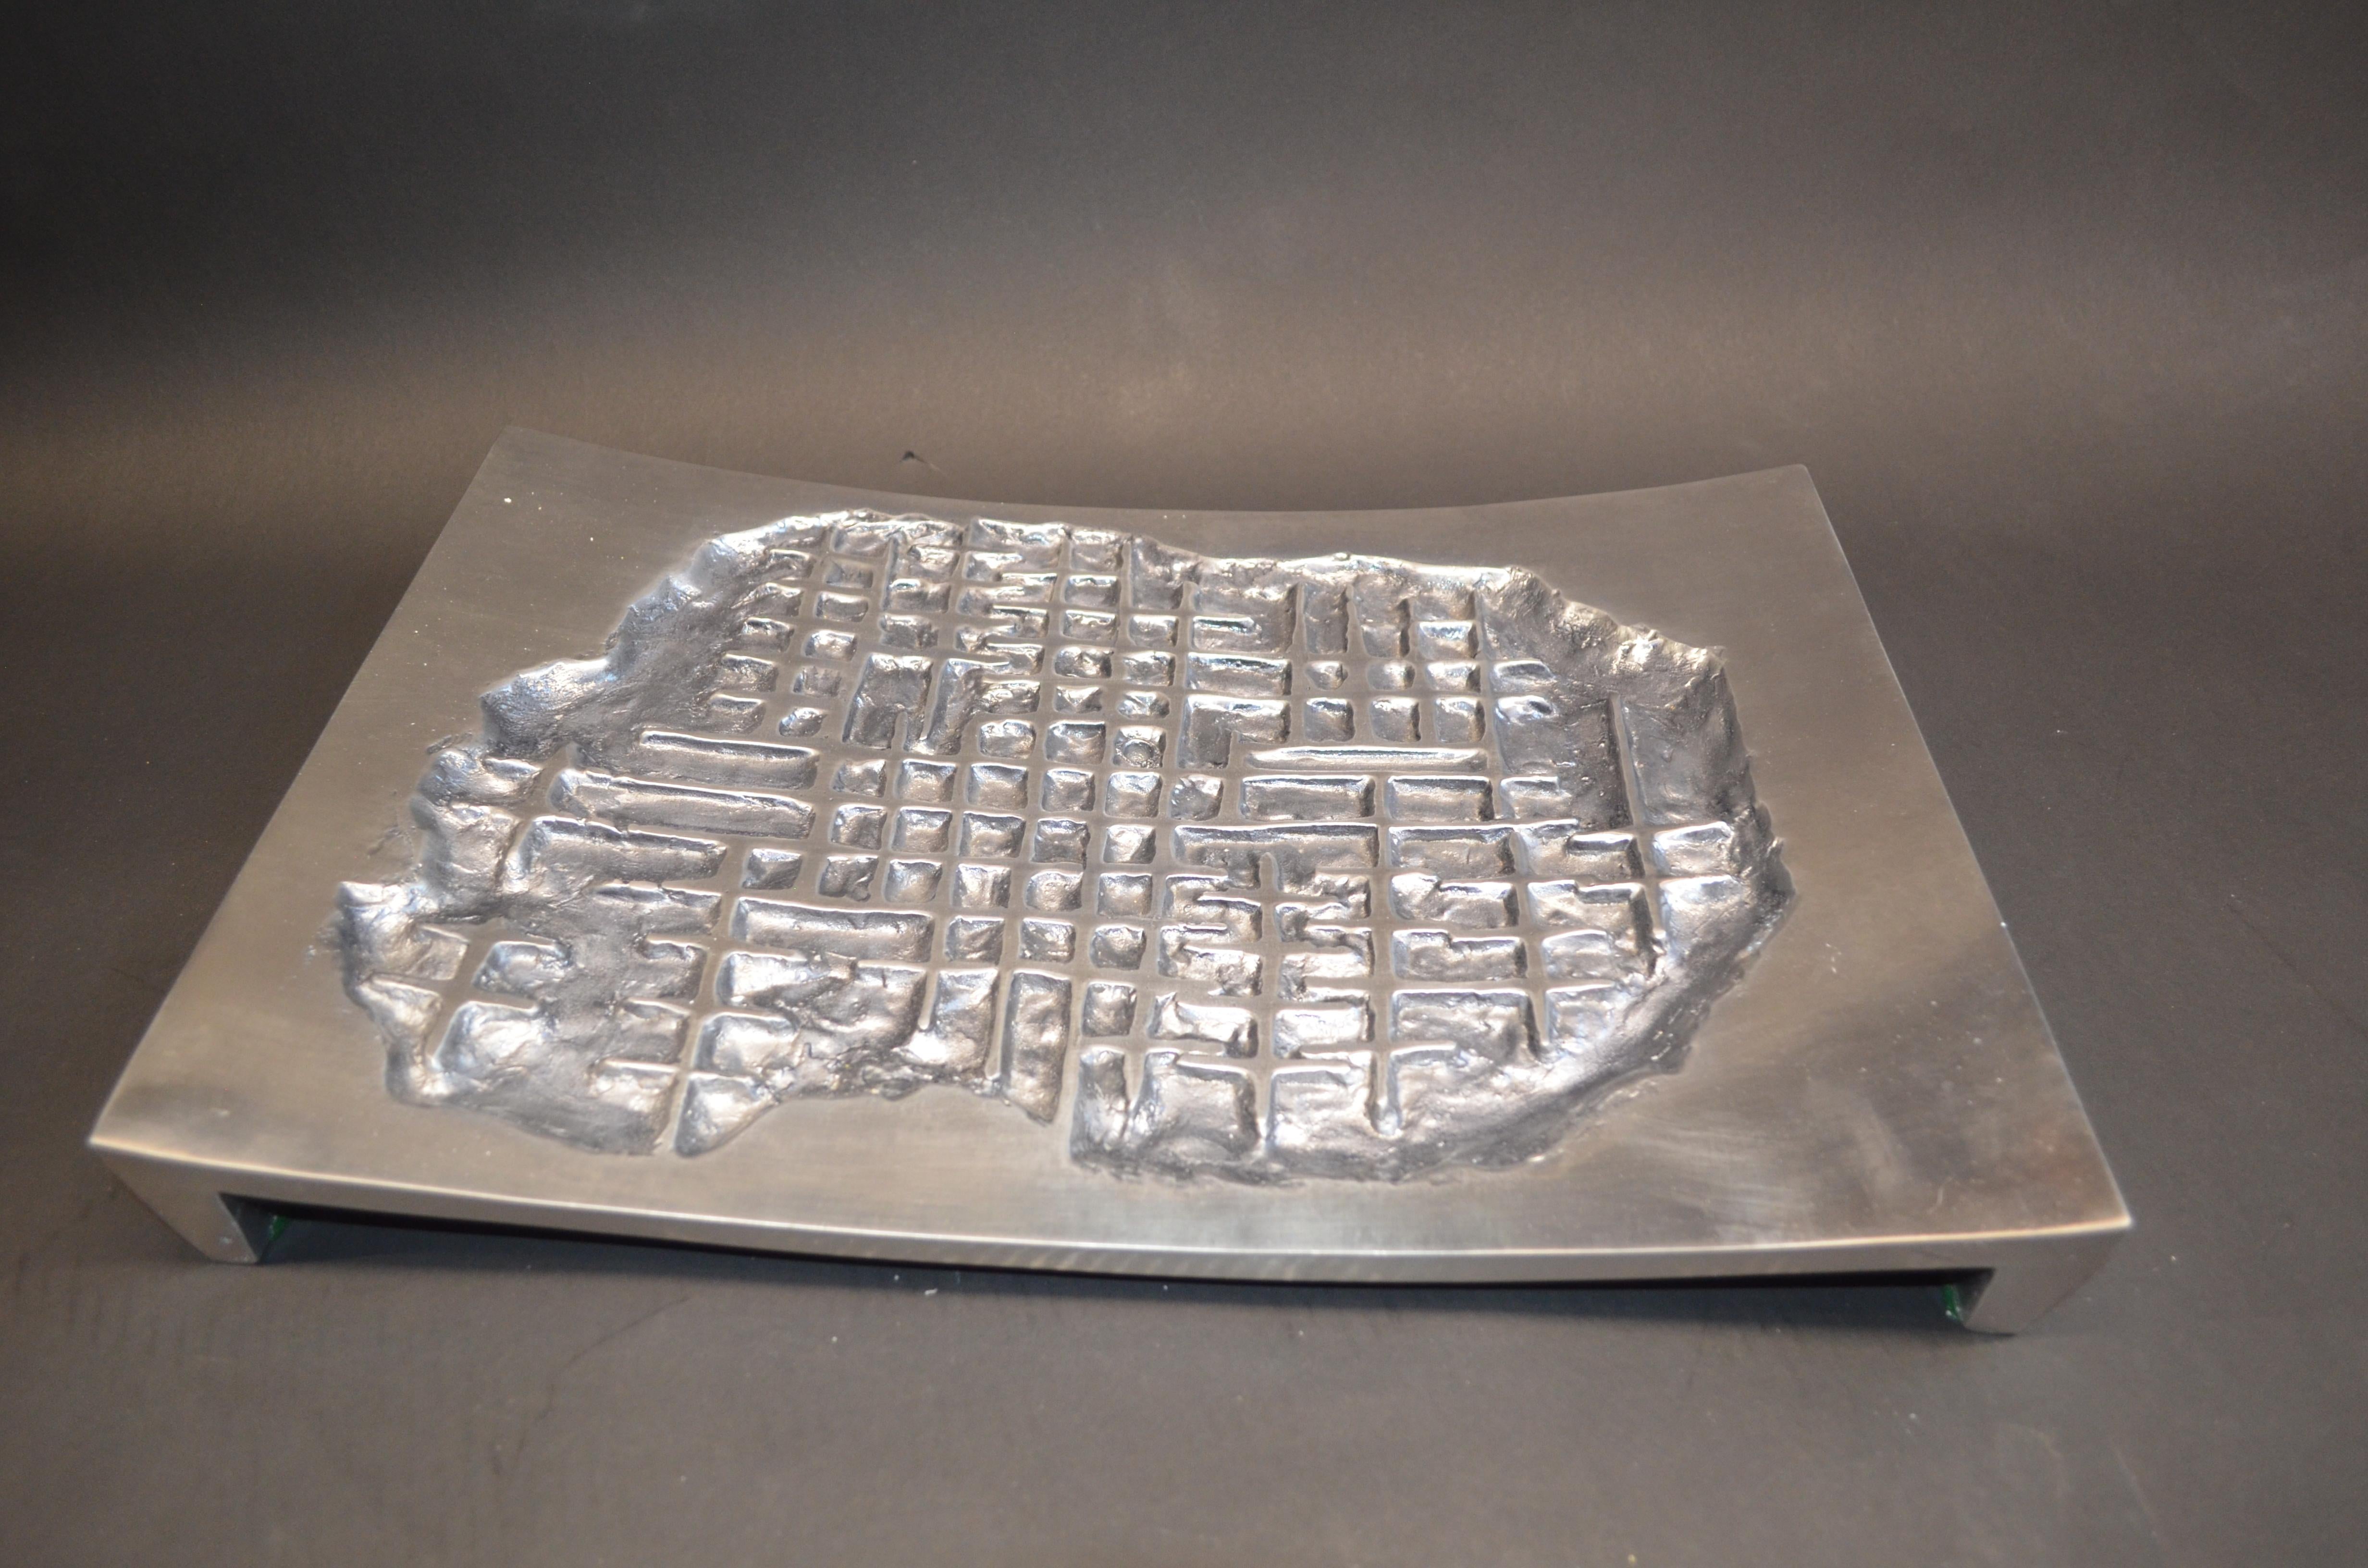 Cast aluminium tray, designed by Italian artist Arnaldo Gamba, carved signed and numbered, 2004, comes with its certificate.